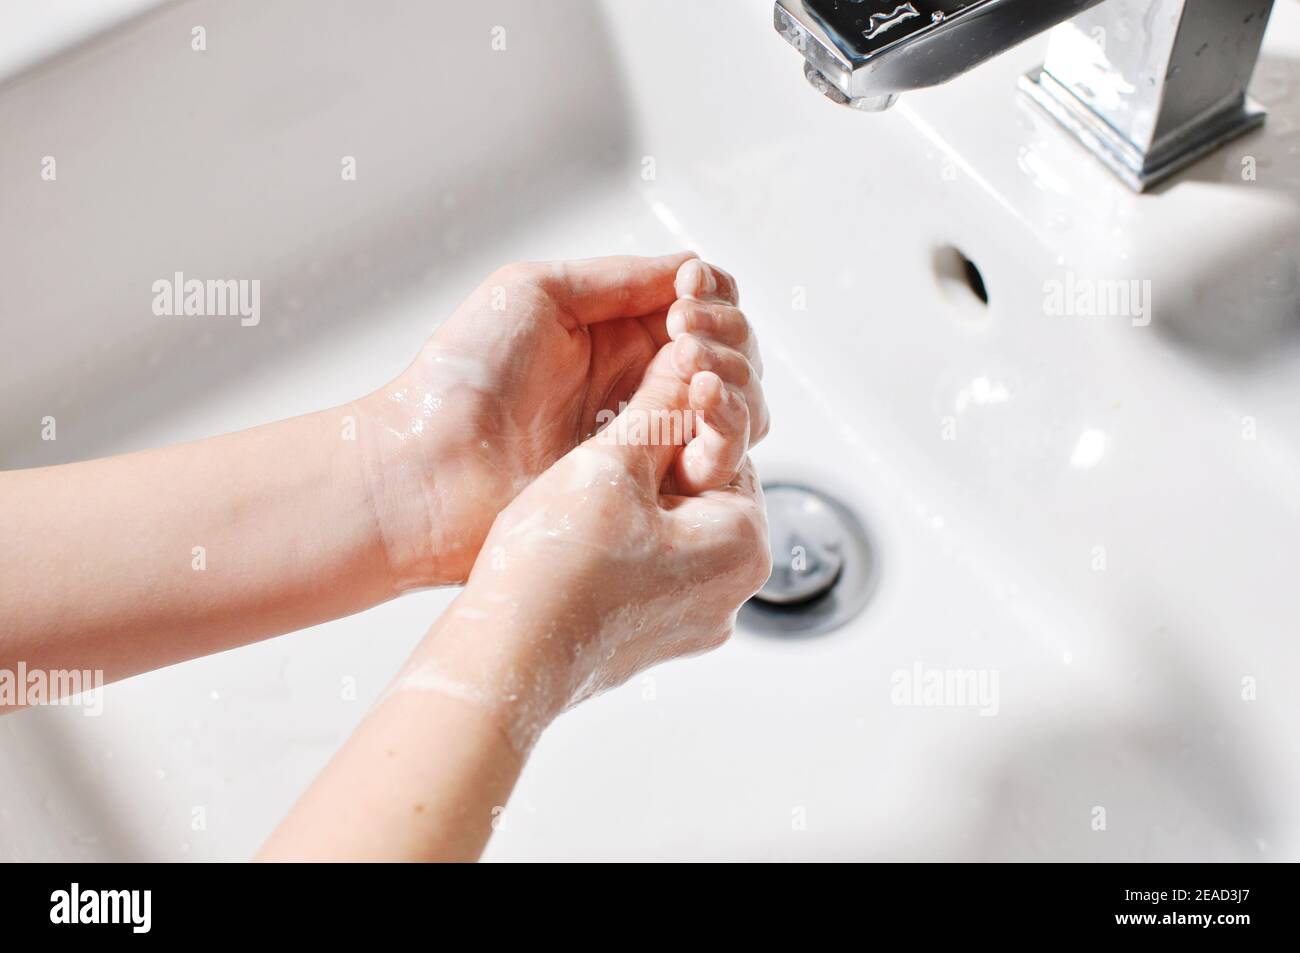 Concept of white European child (girl, kid) cleaning hands with foamy soap over the sink (washbasin). Stock Photo